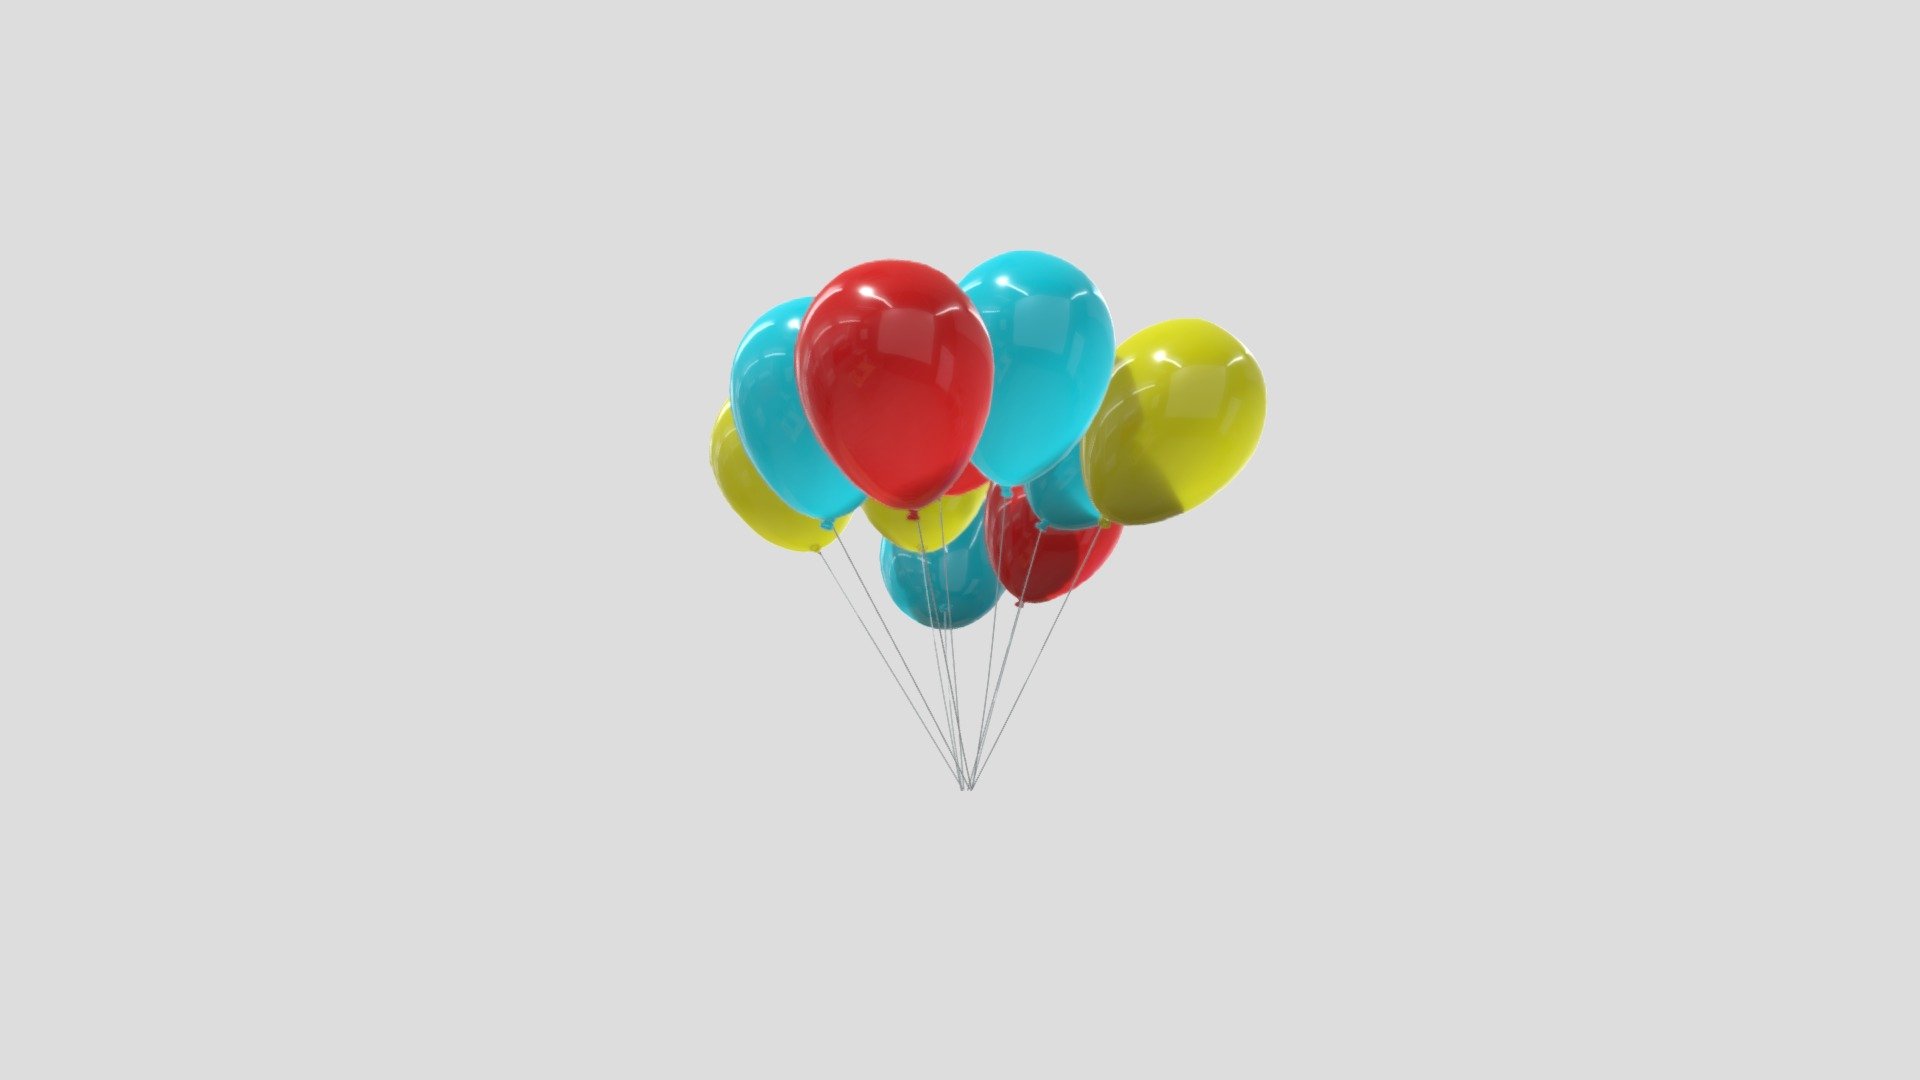 10 balloons simulation. each pulled by a short string. Exported by Alembic(.abc), 

it's not an easy task&hellip;it's a brain-burning job&hellip;

hope you like it.

Other works https://skfb.ly/osqQZ

*Hope you like my other works too*

destruction
https://sketchfab.com/PaulYang/collections/destruction

Balloons
https://sketchfab.com/PaulYang/collections/balloons

Feather
https://sketchfab.com/PaulYang/collections/feather - Balloon 01 10 Looping - Buy Royalty Free 3D model by paulyang 3d model